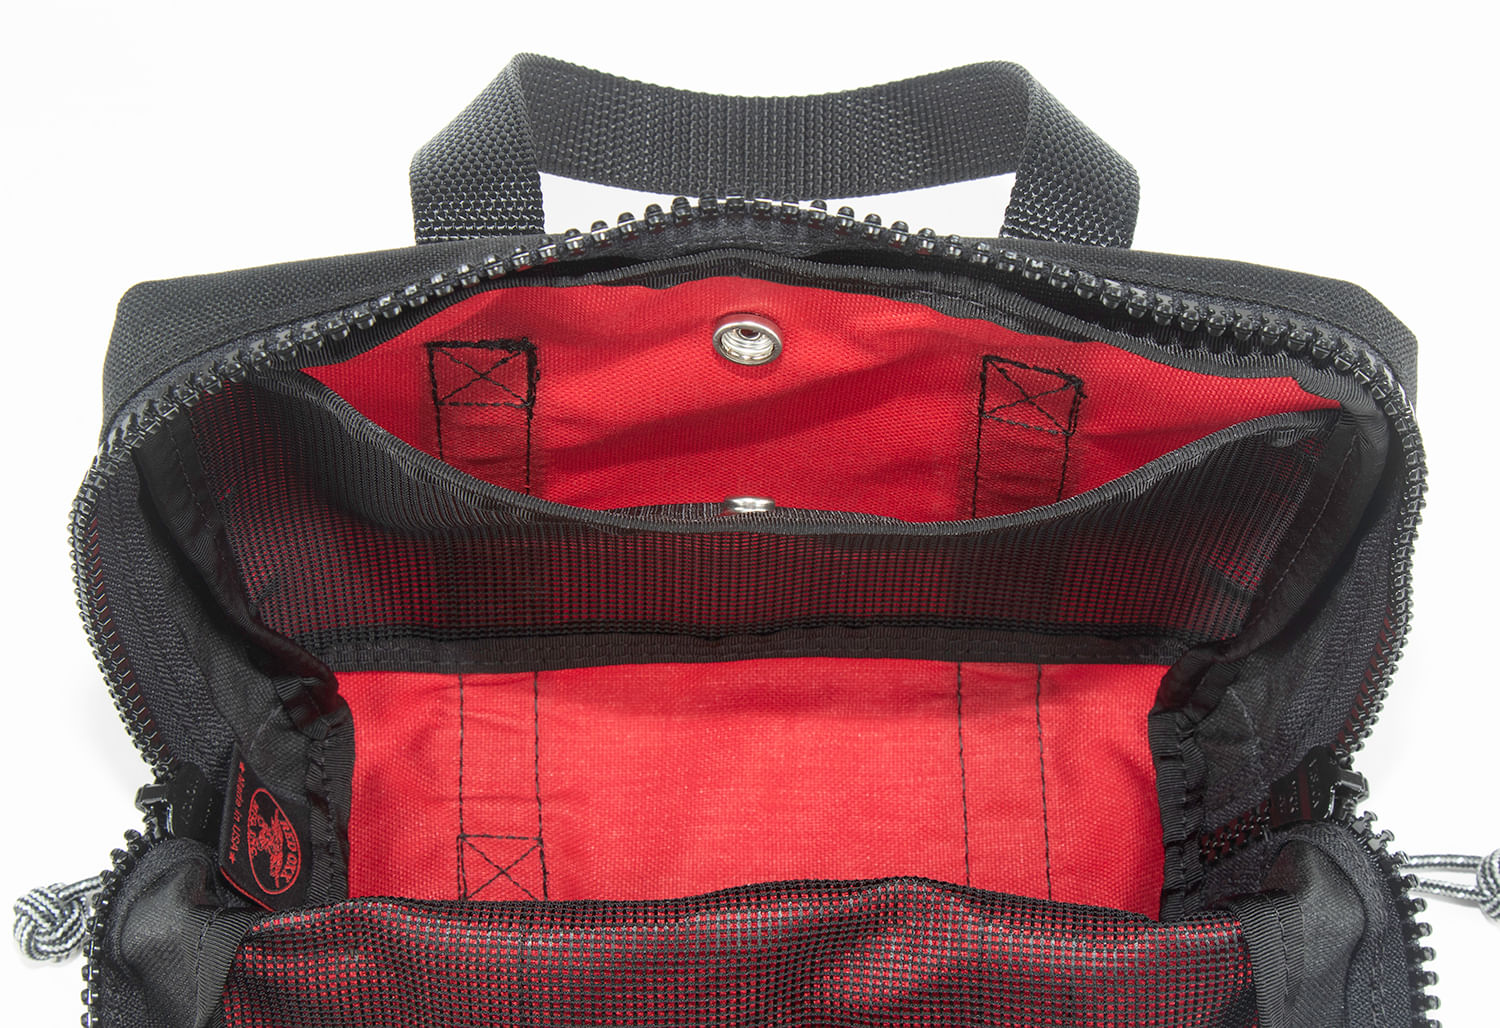 Internal view of the Lil Roy with mesh divider in the open position with snap closure.